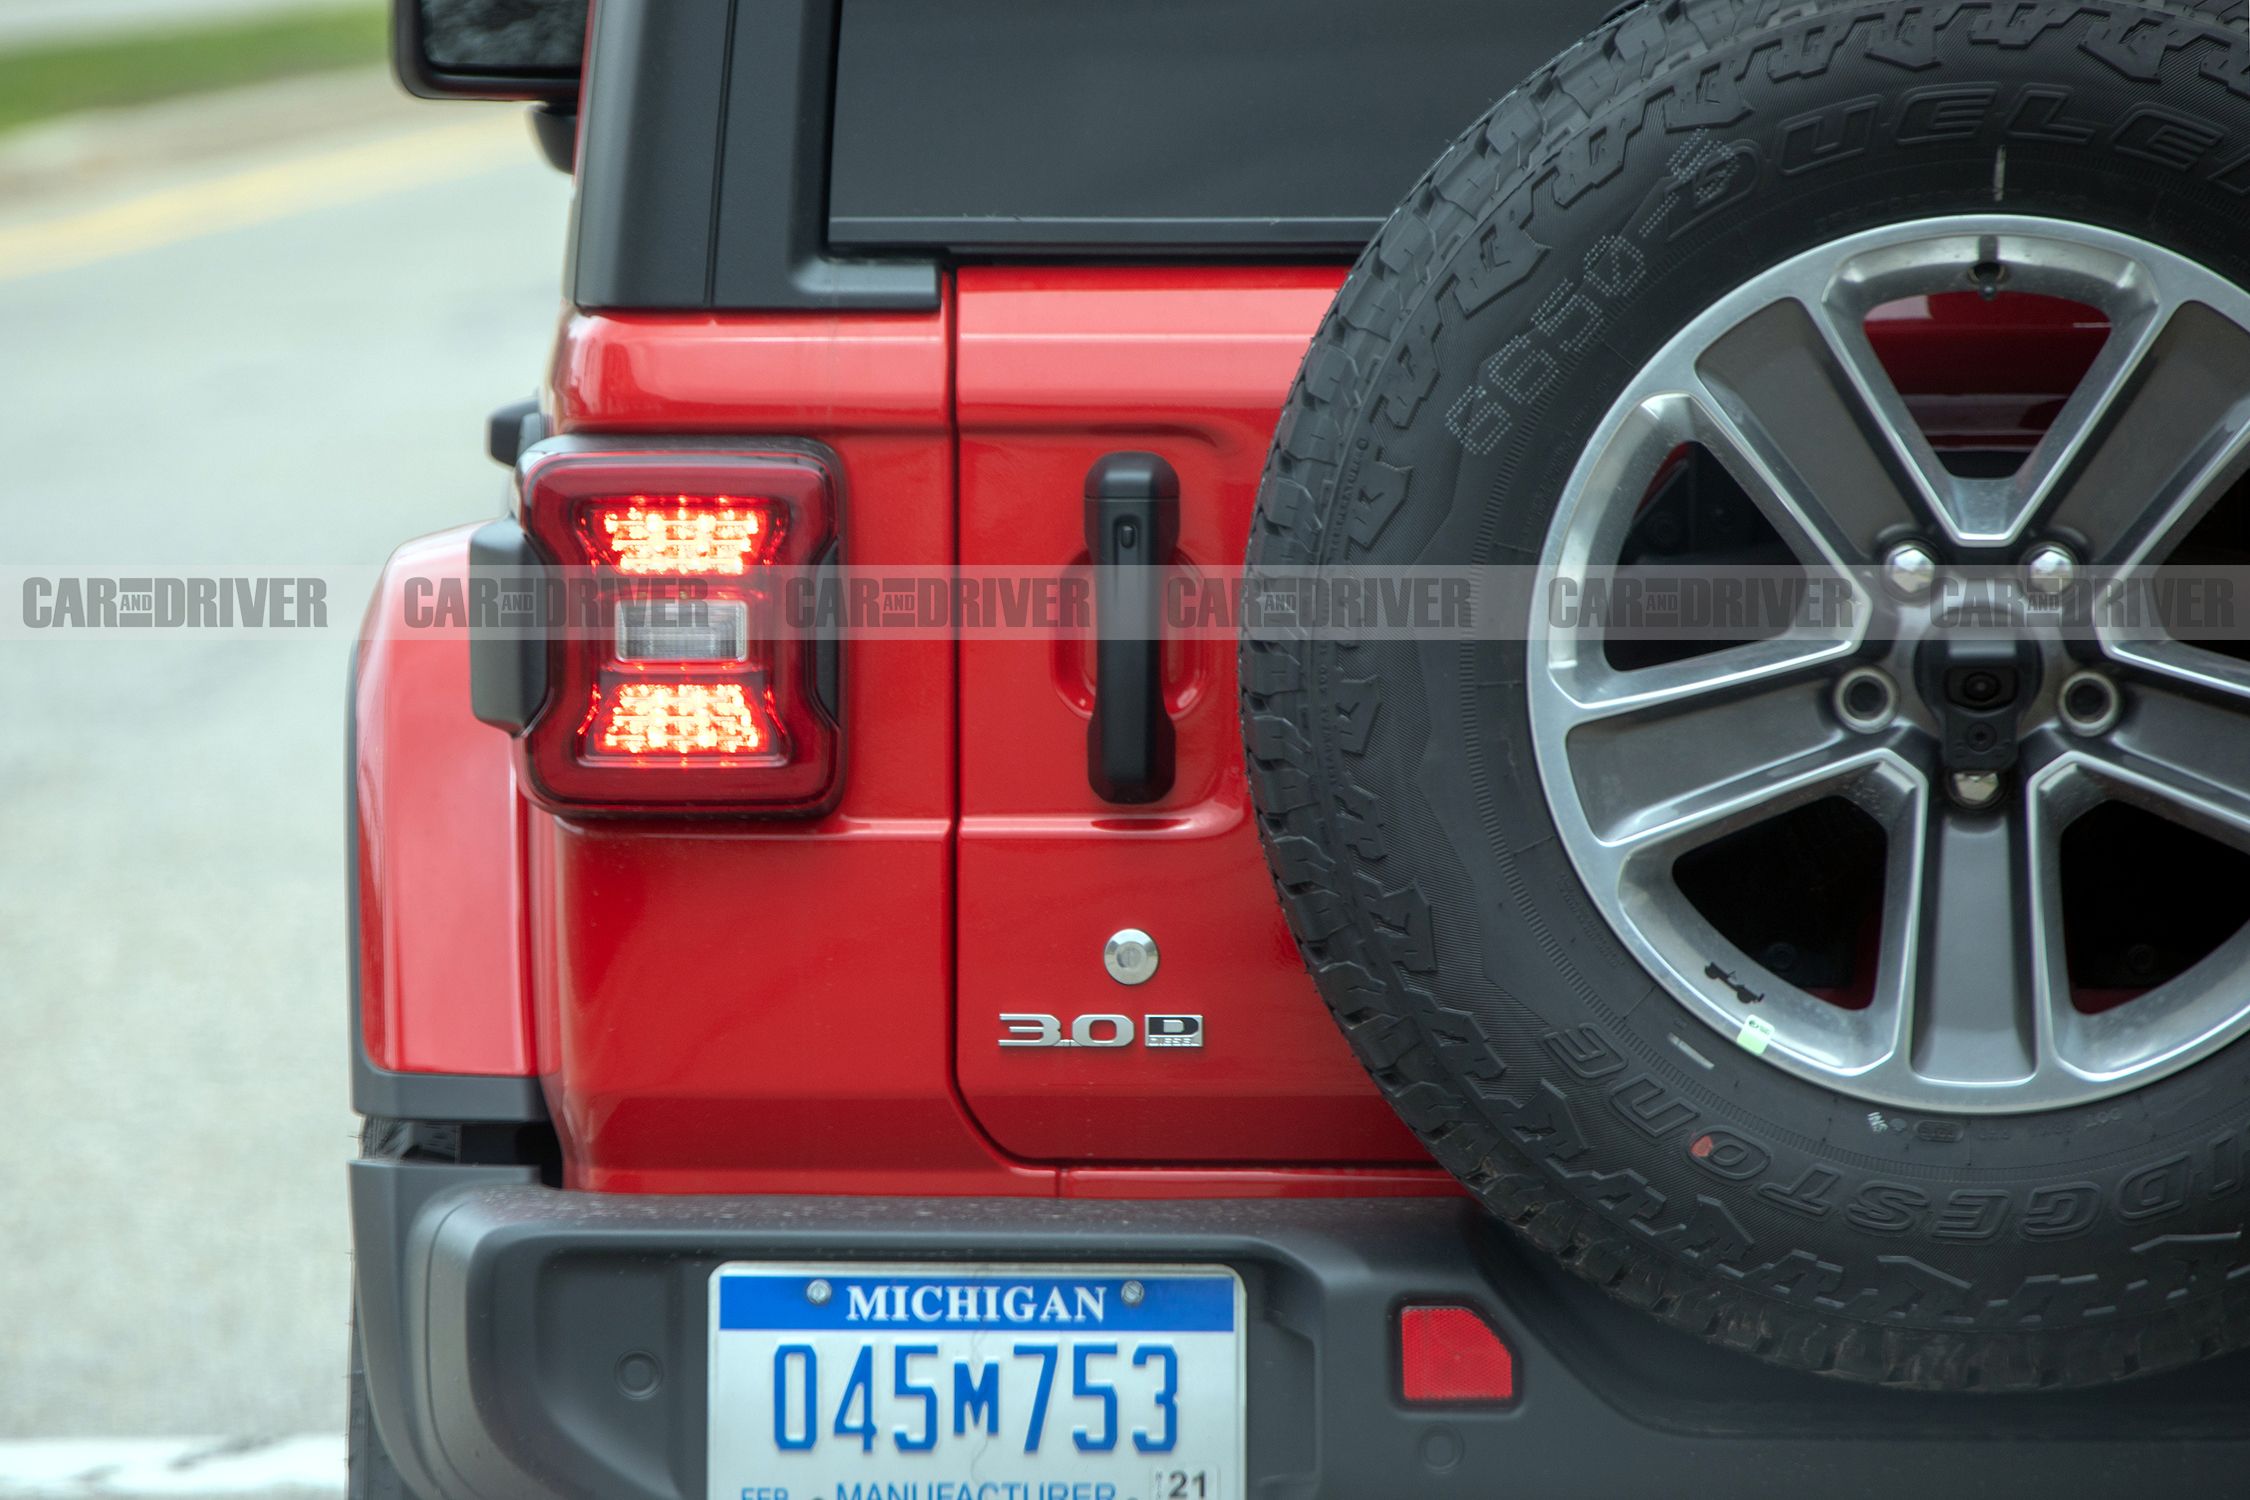 2020 Jeep Wrangler Adds  Diesel V-6 with 442 LB-FT of Torque